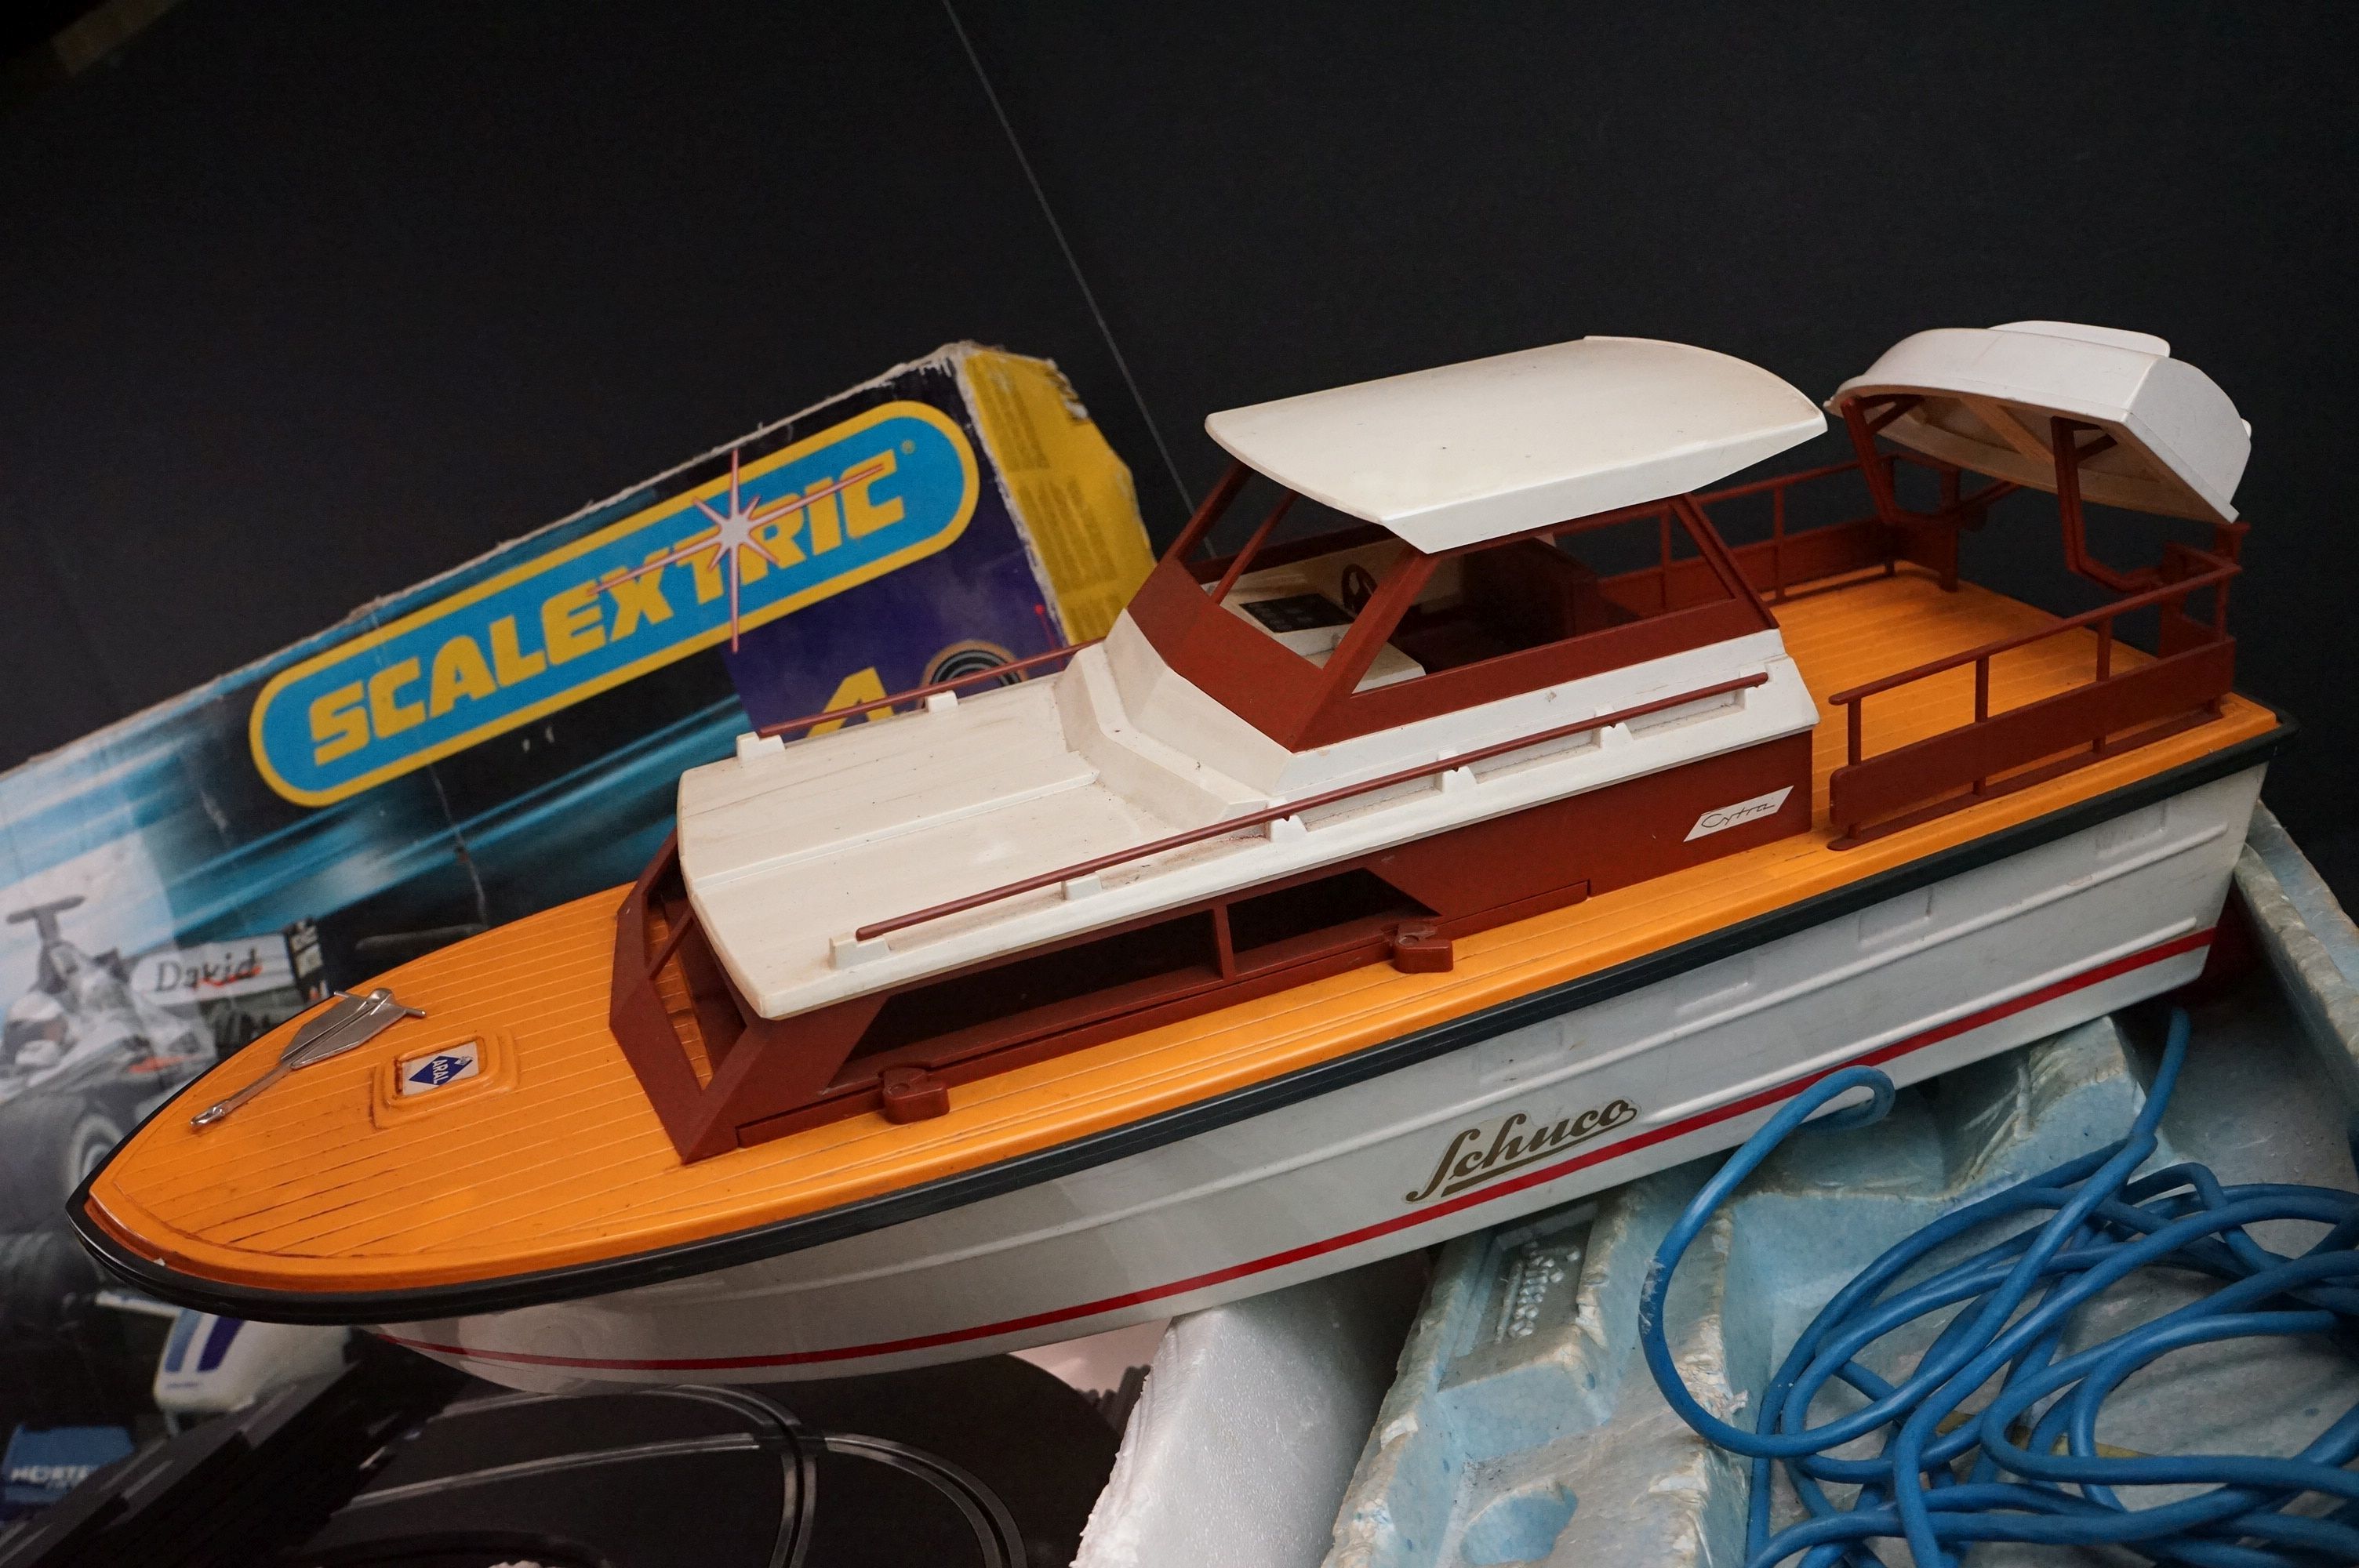 Schuco No. 763 Cytra Ambassador 38 yacht within polystyrene packaging plus a boxed Scalextric - Bild 3 aus 12